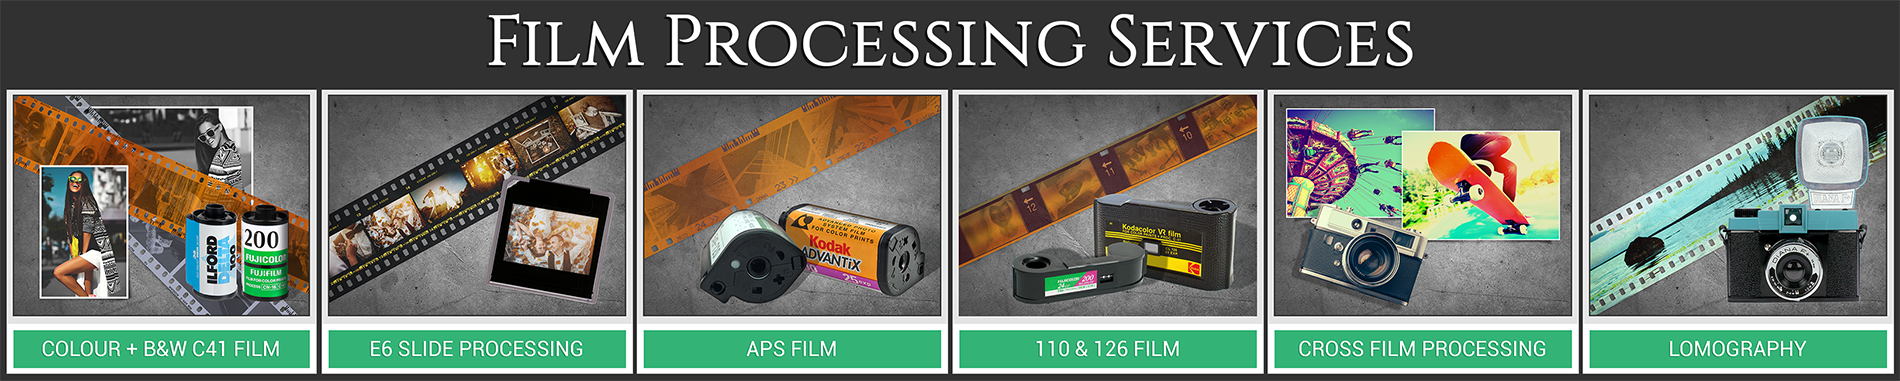 Film Processing Services